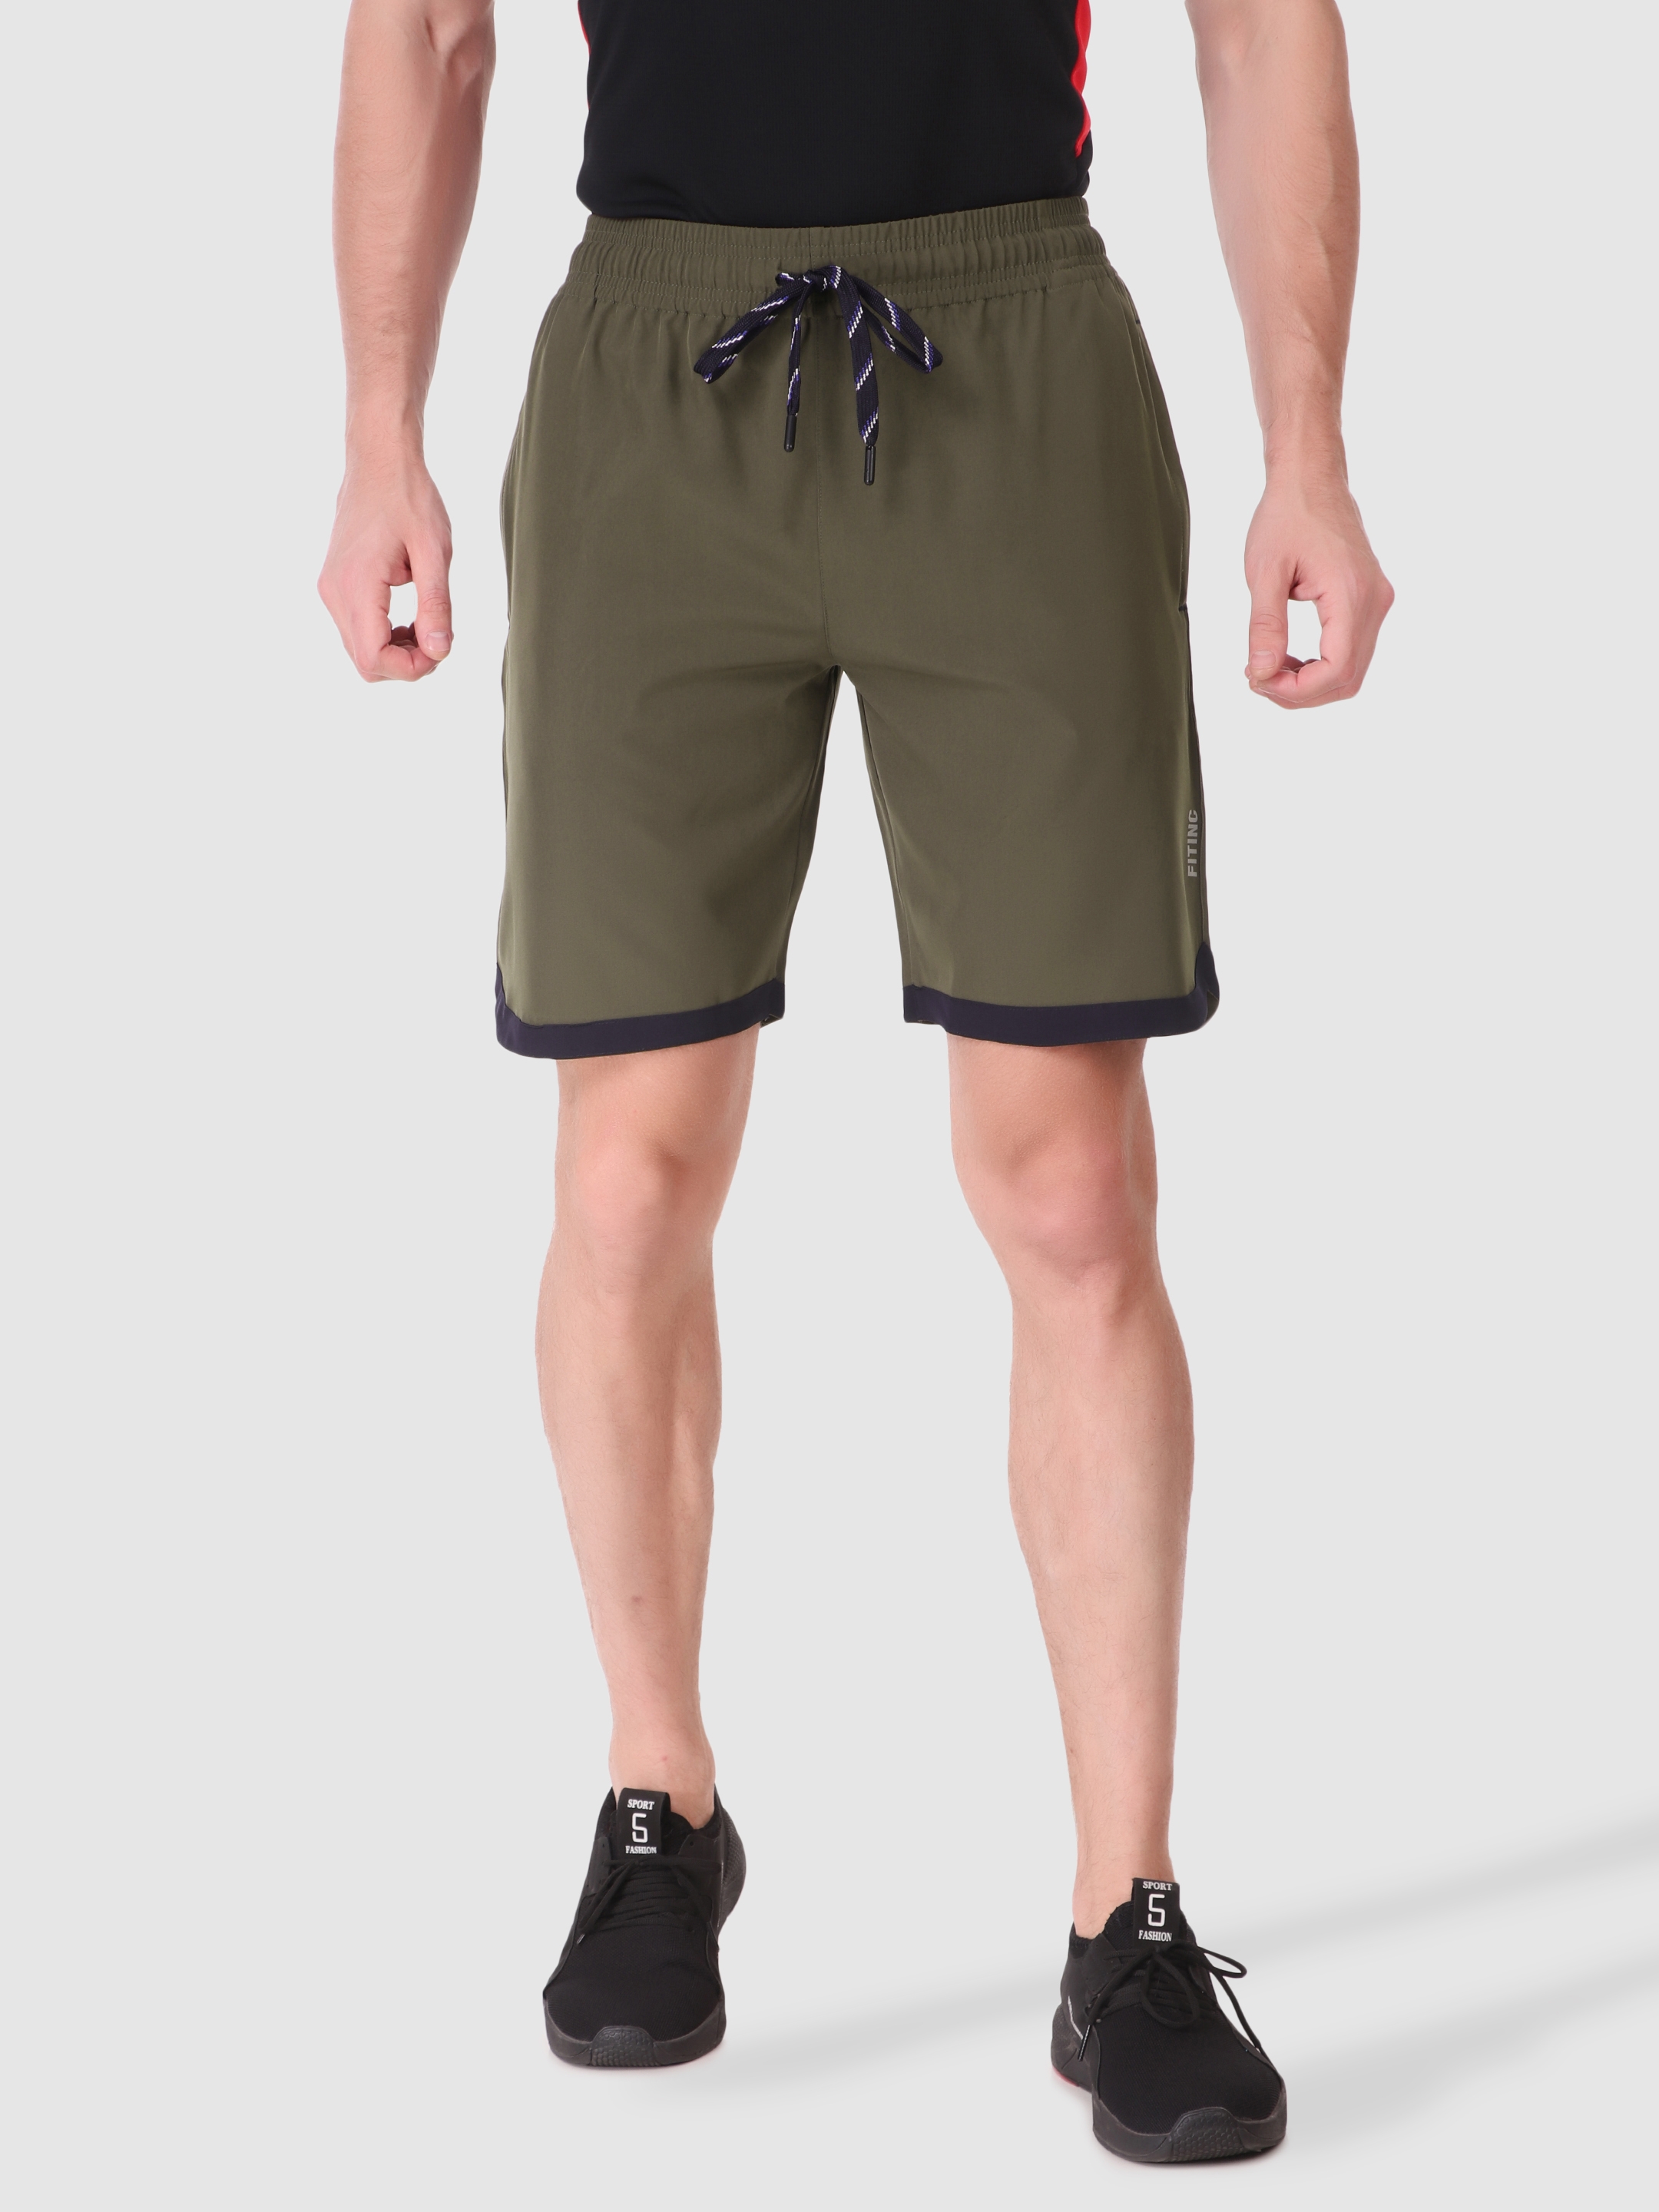 Fitinc | Fitinc N.S Lycra Olive Shorts for Men with Zipper Pockets & Knee Design